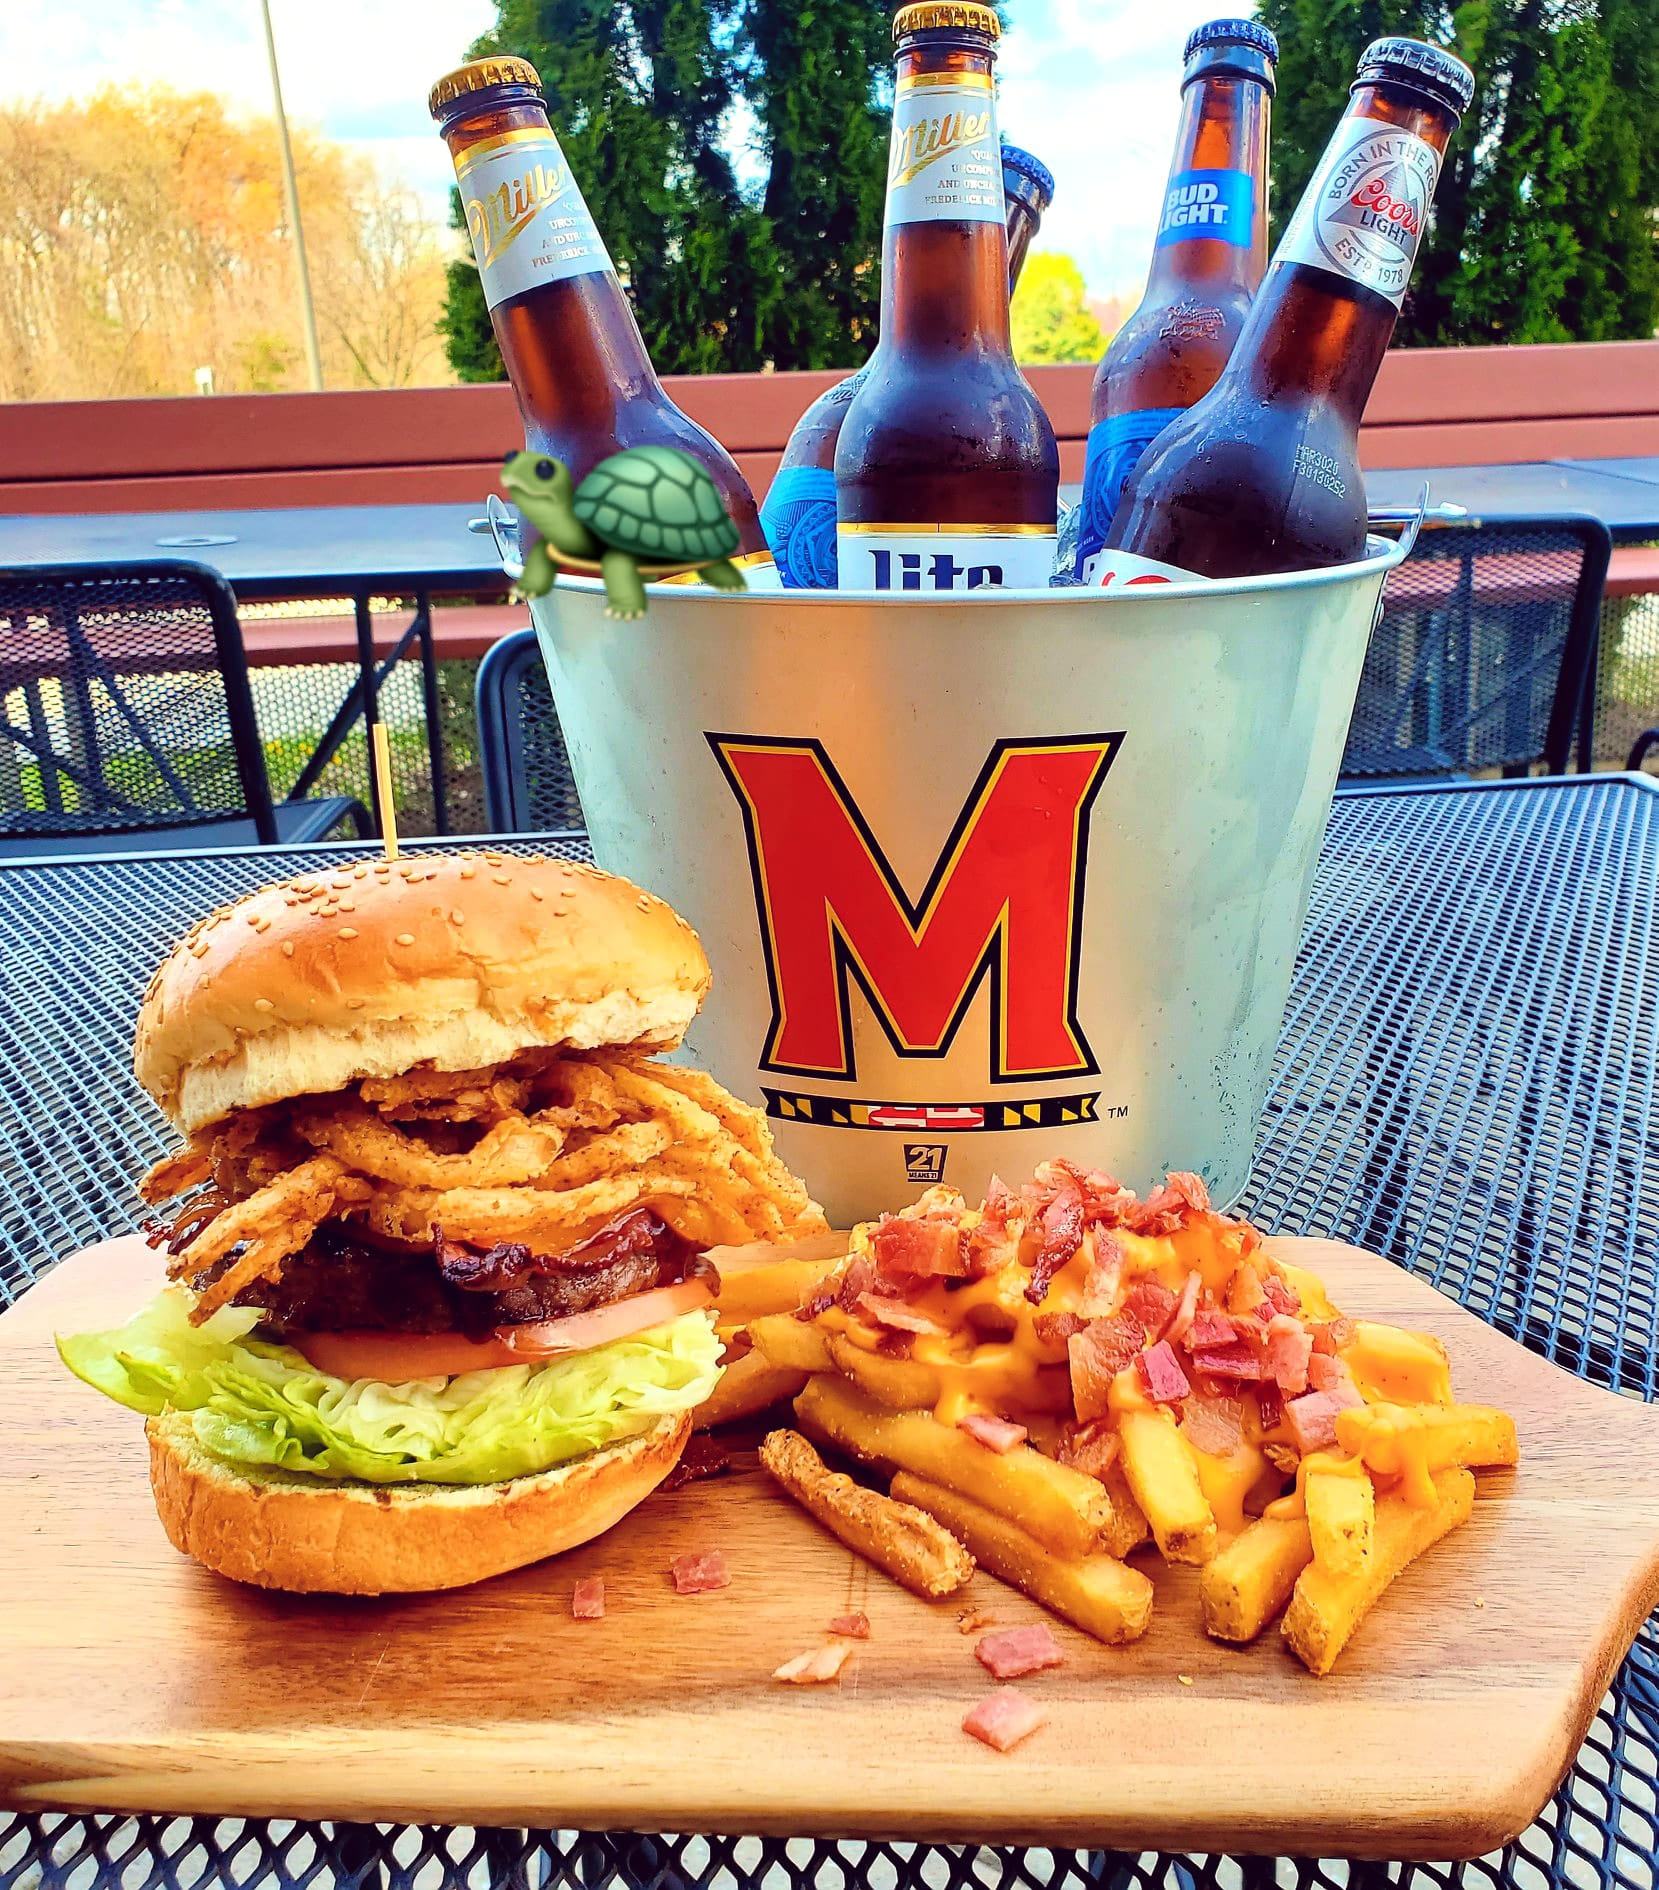 a burger with fries and a bucket of beer